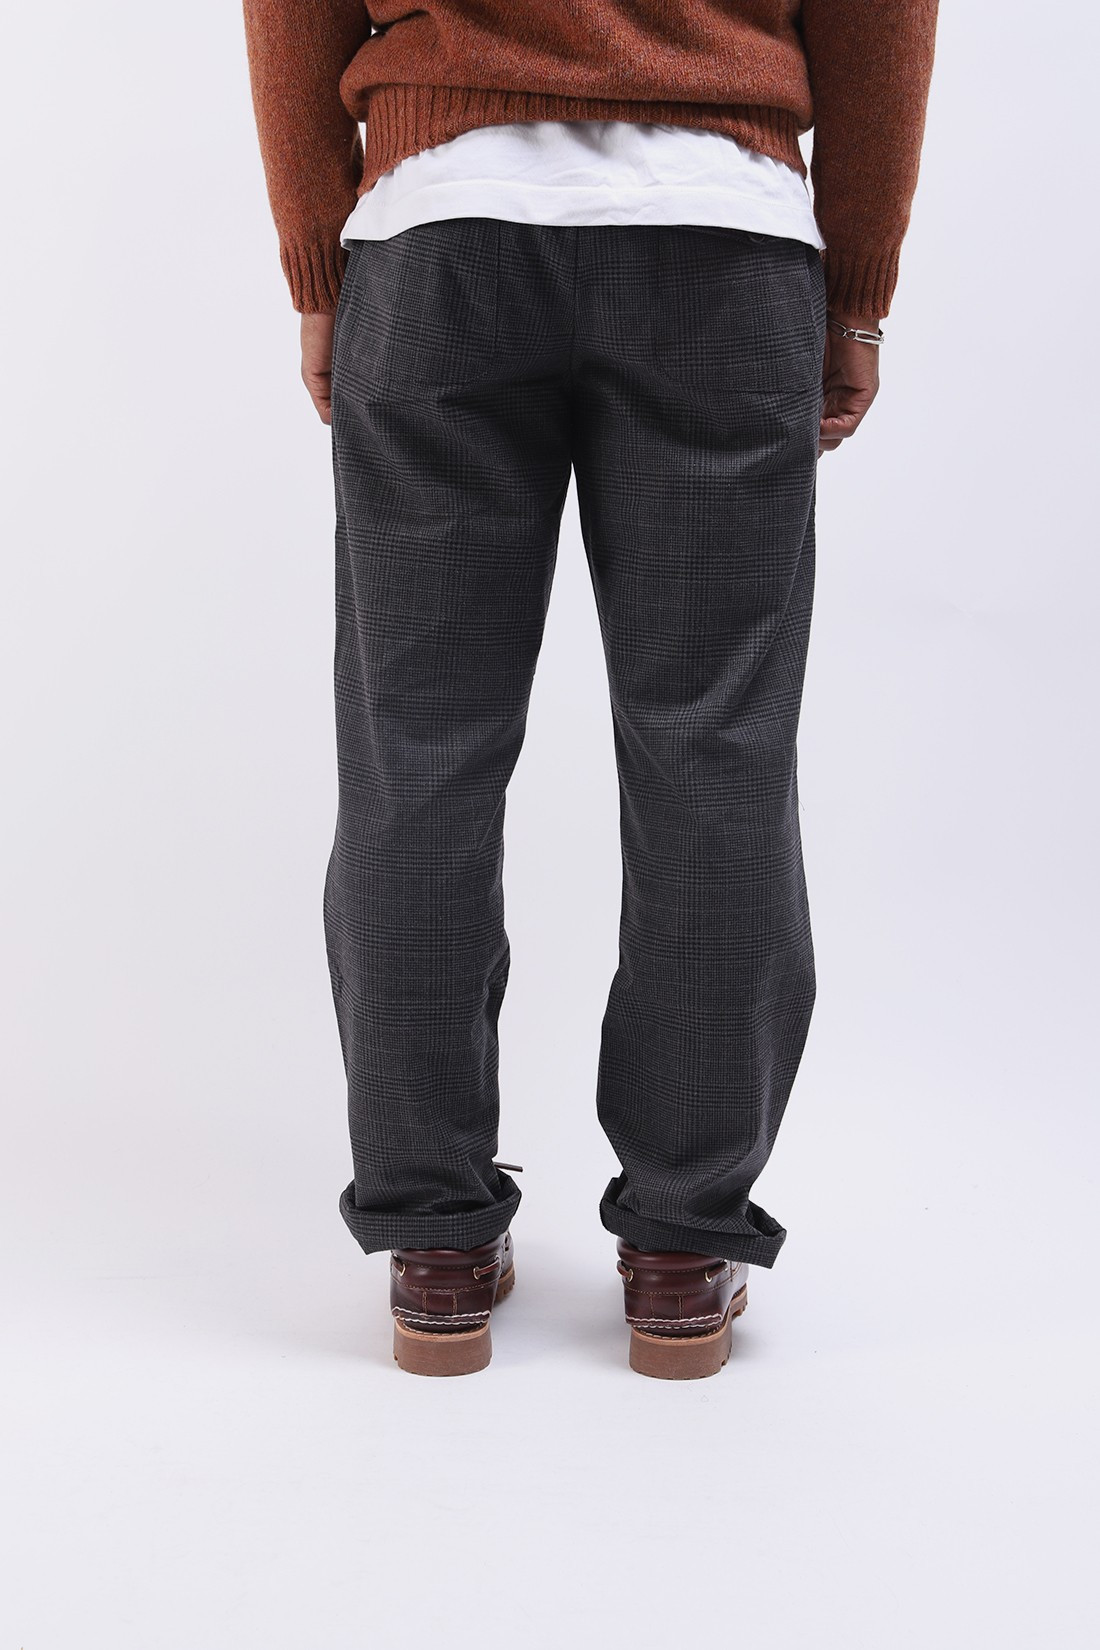 OLIVER SPENCER / Drawstrings trousers dowling Charcoal